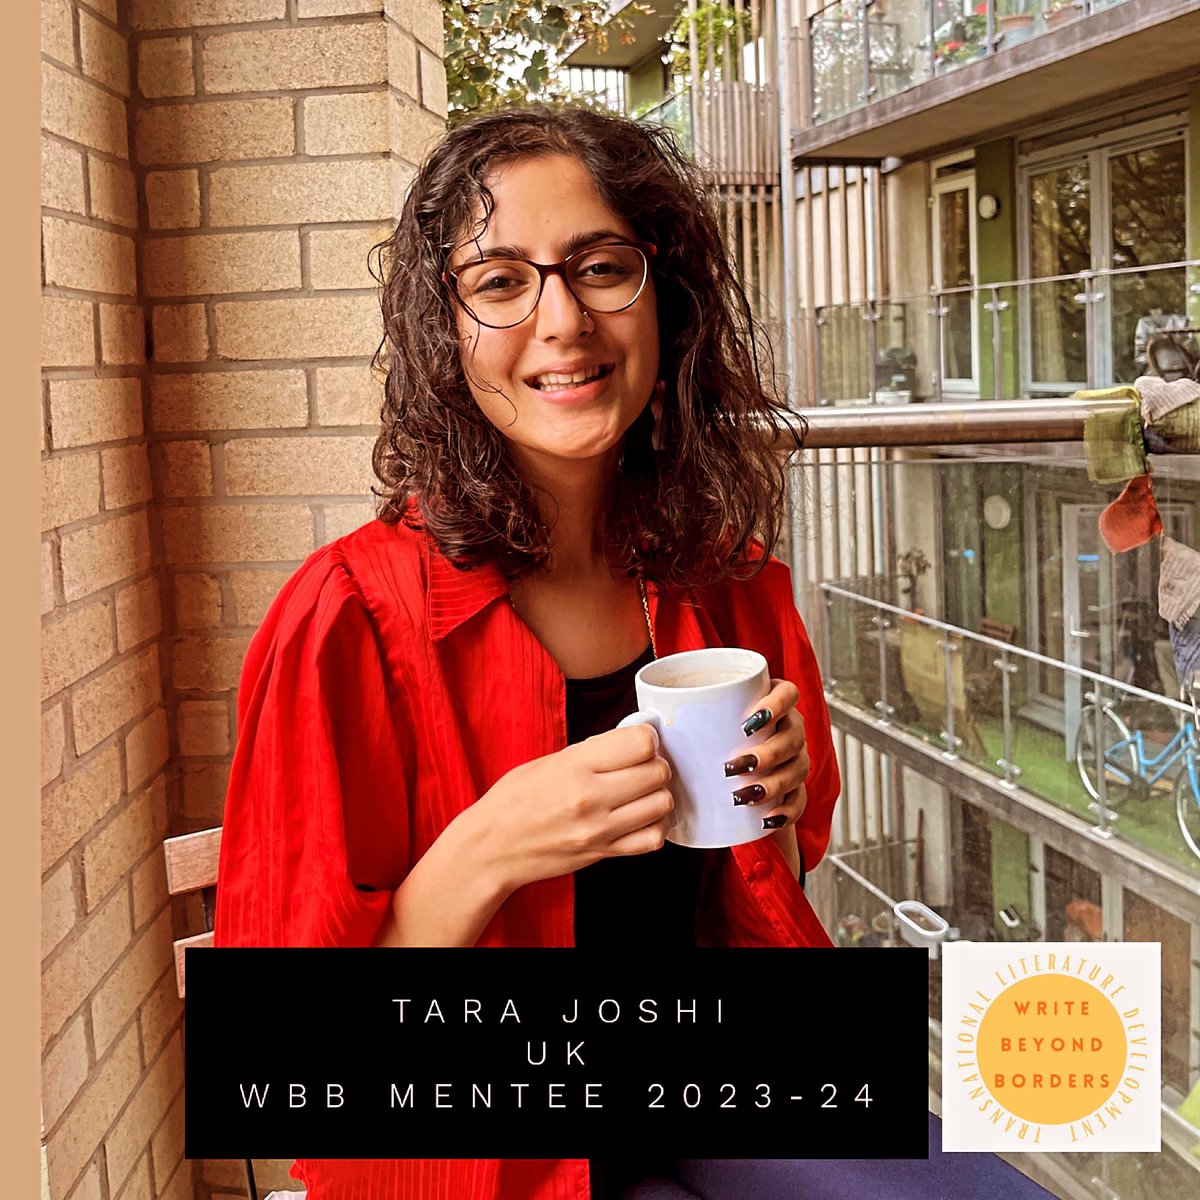 Spotlight on #writebeyondborders mentees:

Tara Joshi is a London-based British-Indian freelance journalist. She was born in Mumbai, raised on the Isle of Wight and studied for an undergraduate degree in Ancient and Medieval History and Culture in Dublin. 🧵@tara_dwmd